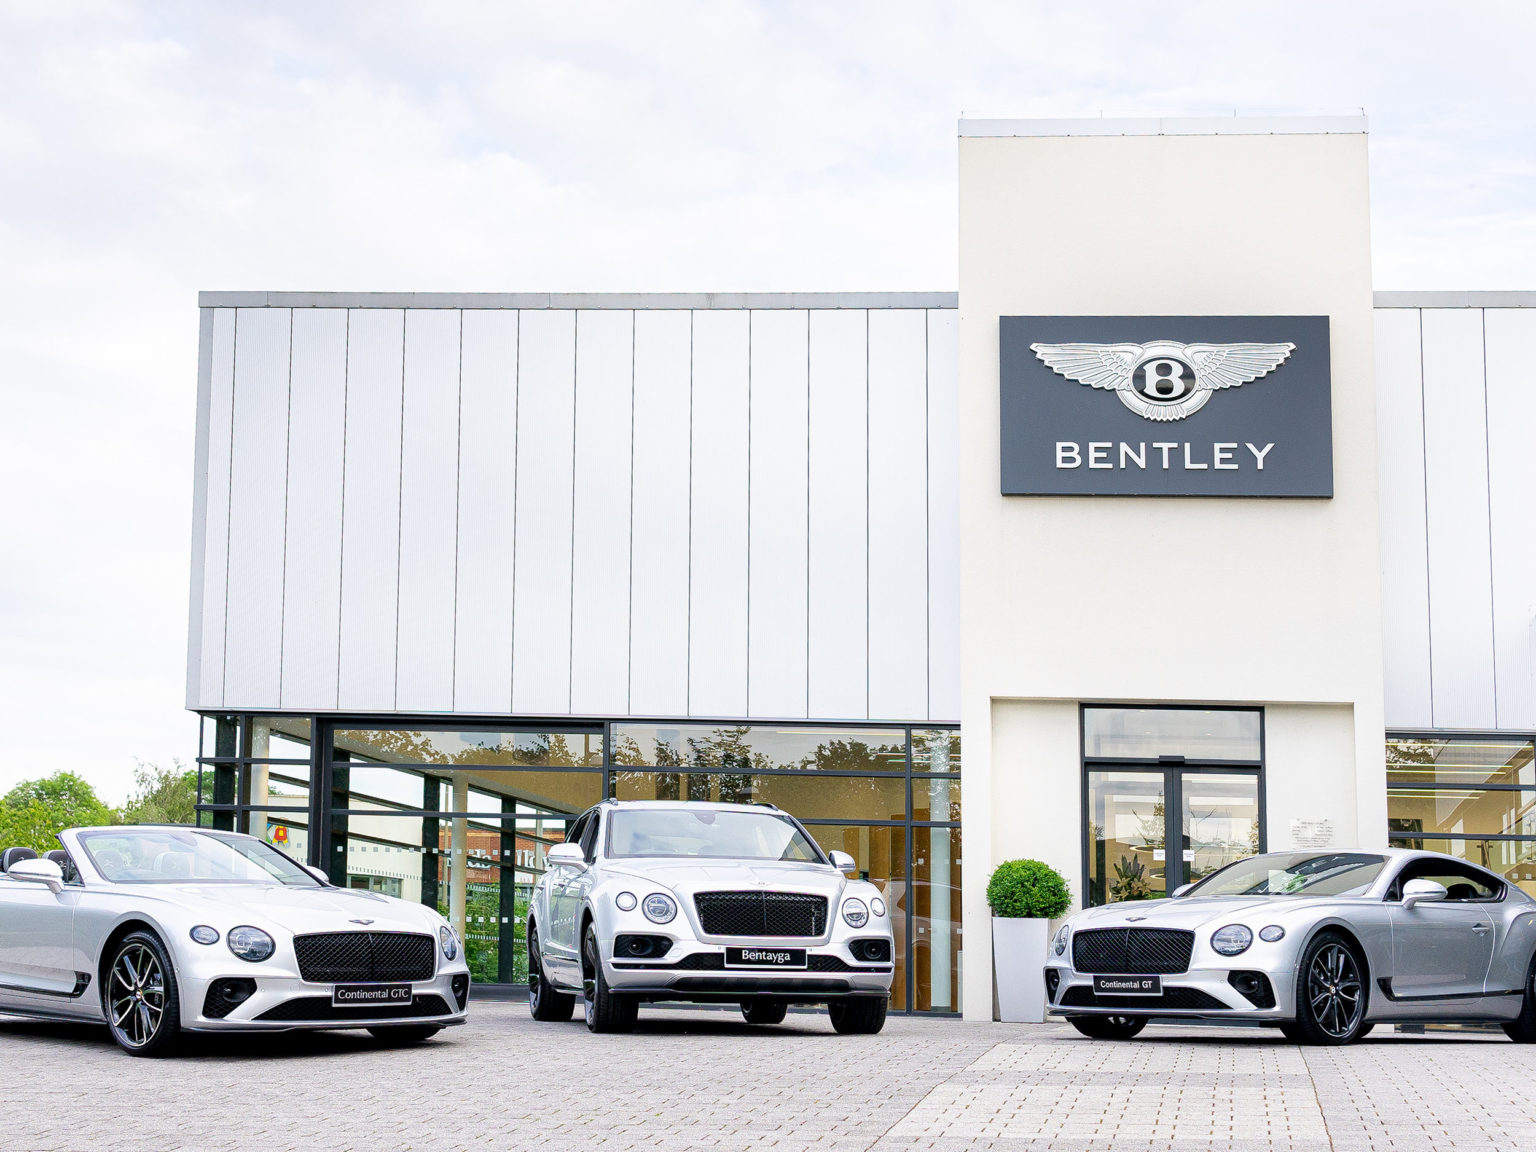 Bentley has launched a new CPO program designed to give used car buyers confidence in their purchase.